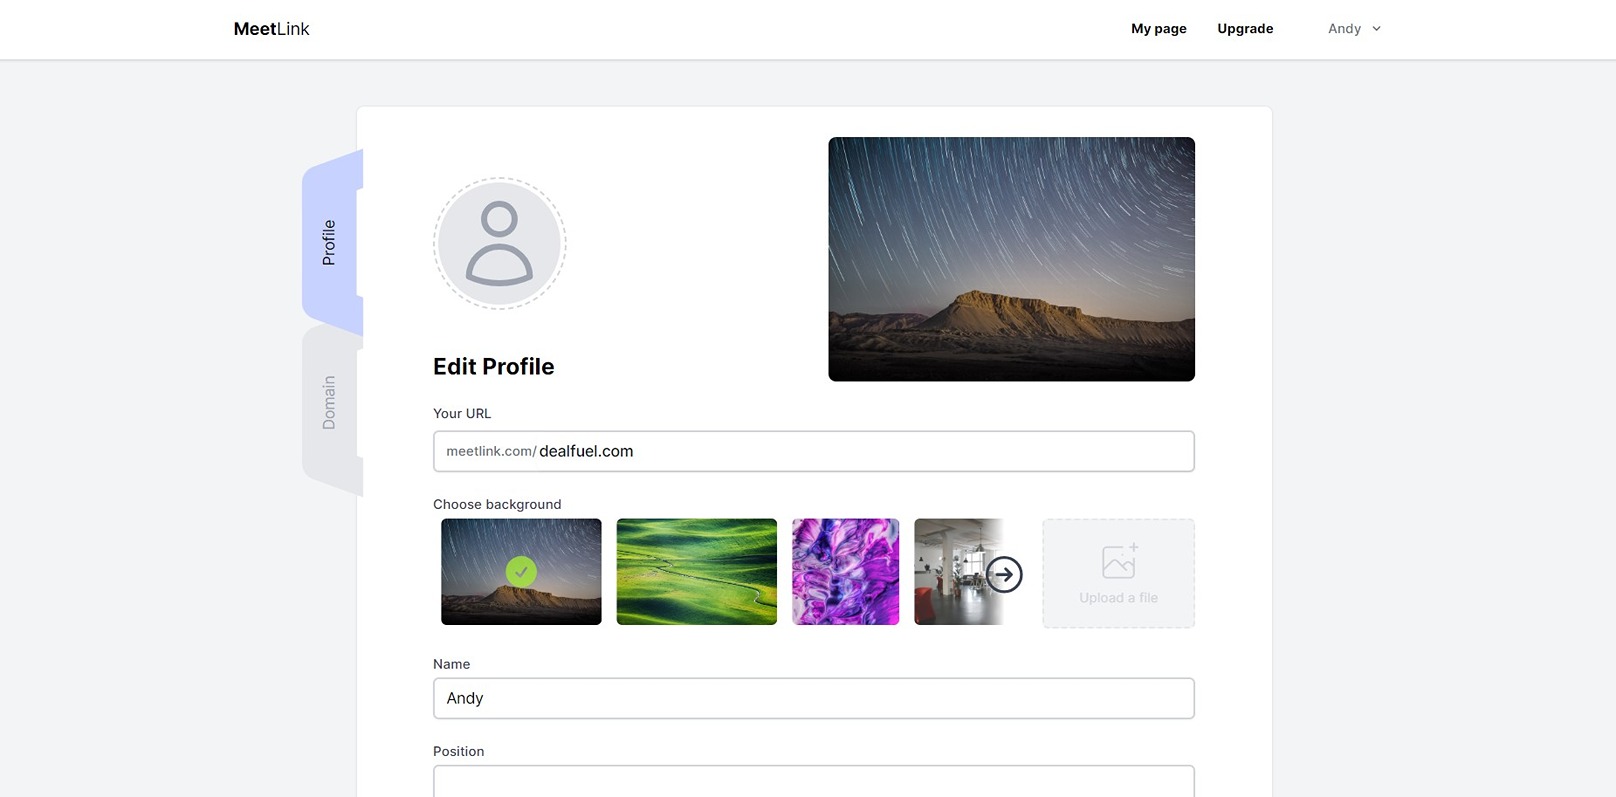 Edit your profile so your information is visible on the landing page